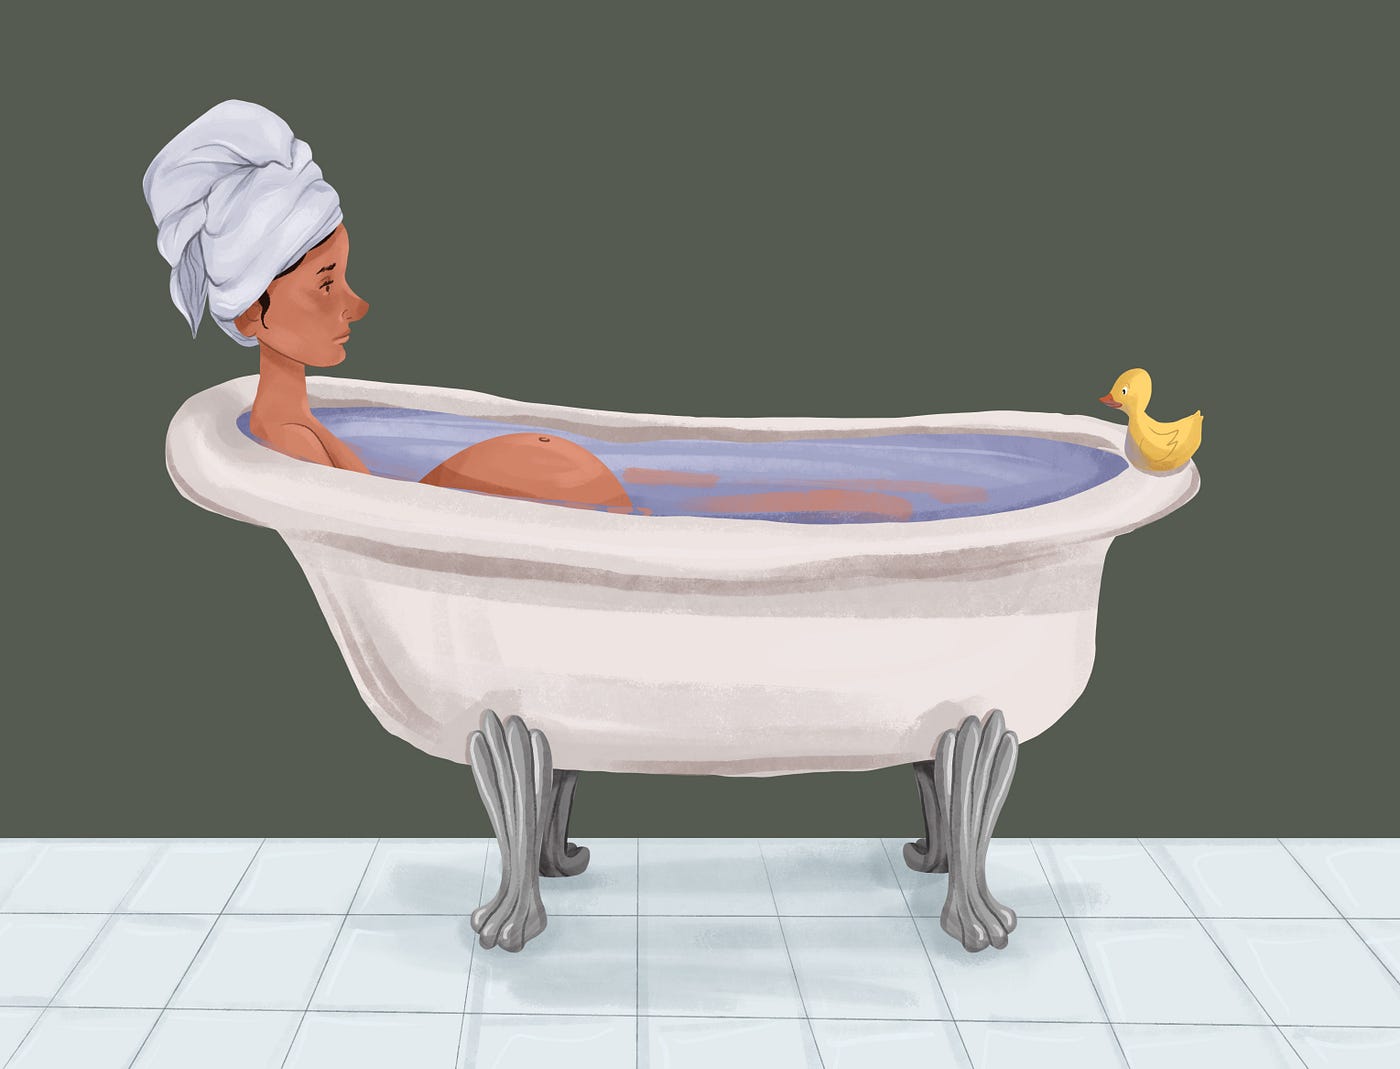 Why I Started Taking Baths During Pregnancy, by Jessica Pearce Rotondi, Moms Don't Have Time to Write